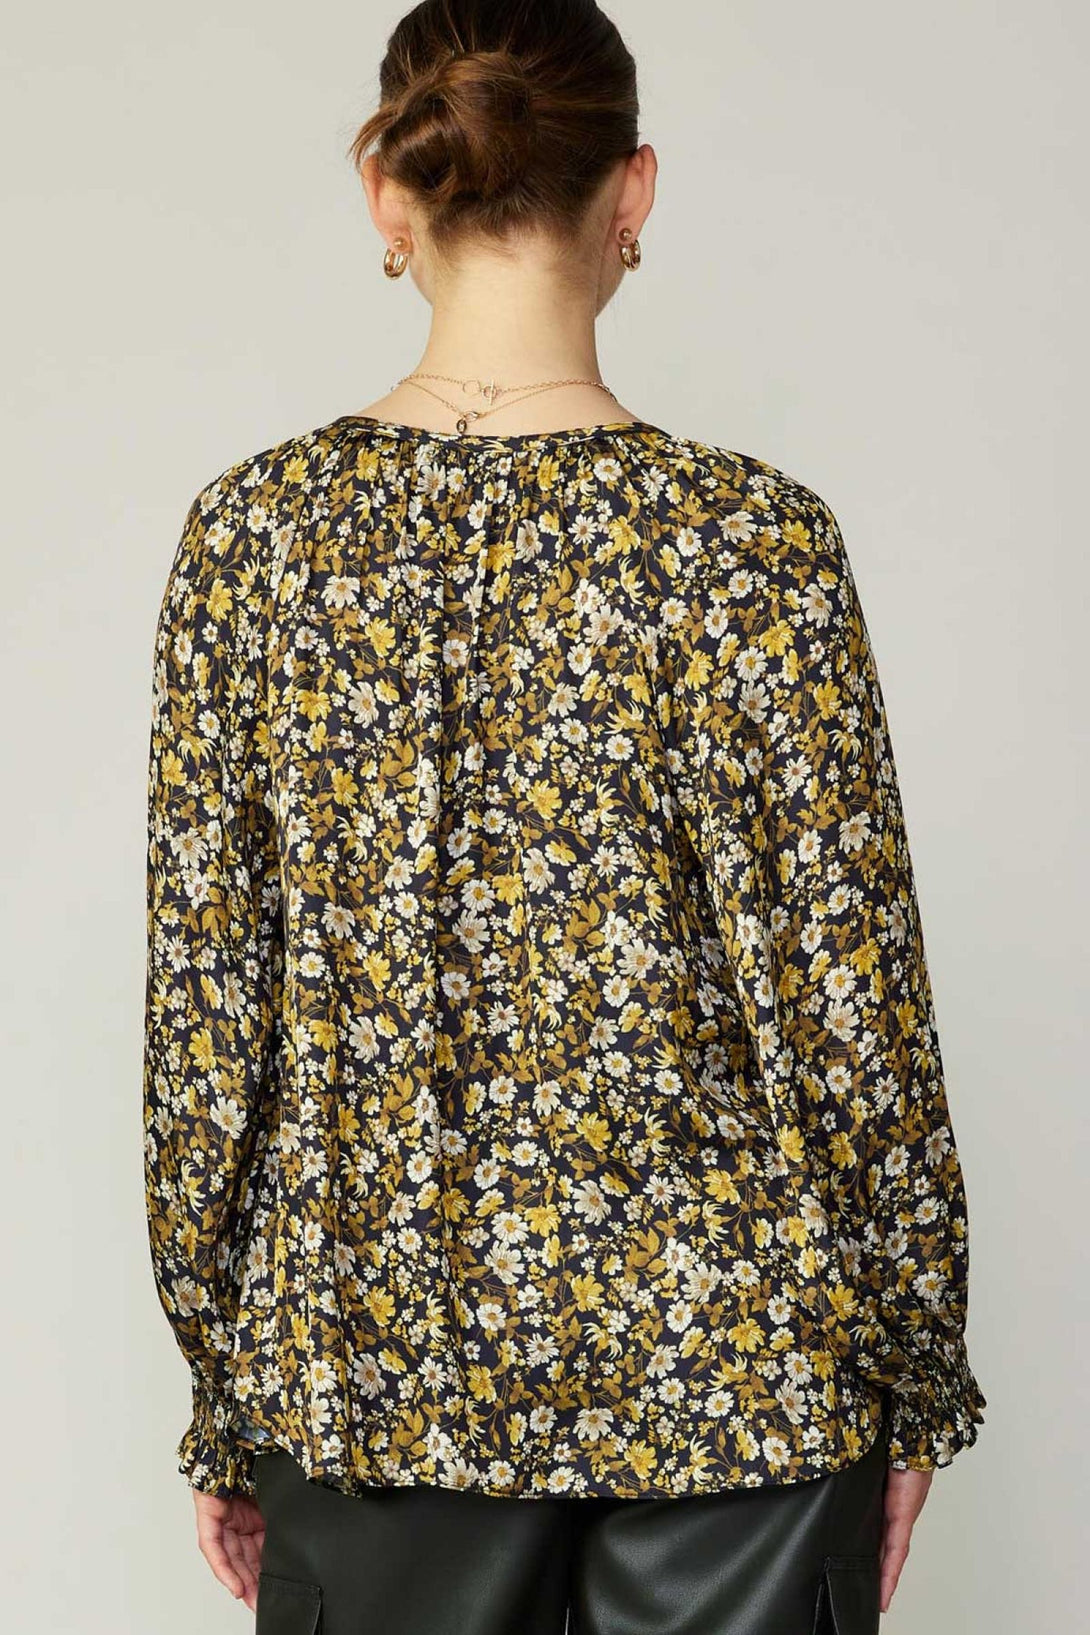 Current Air Long Sleeve Floral Blouse V-Neck Top